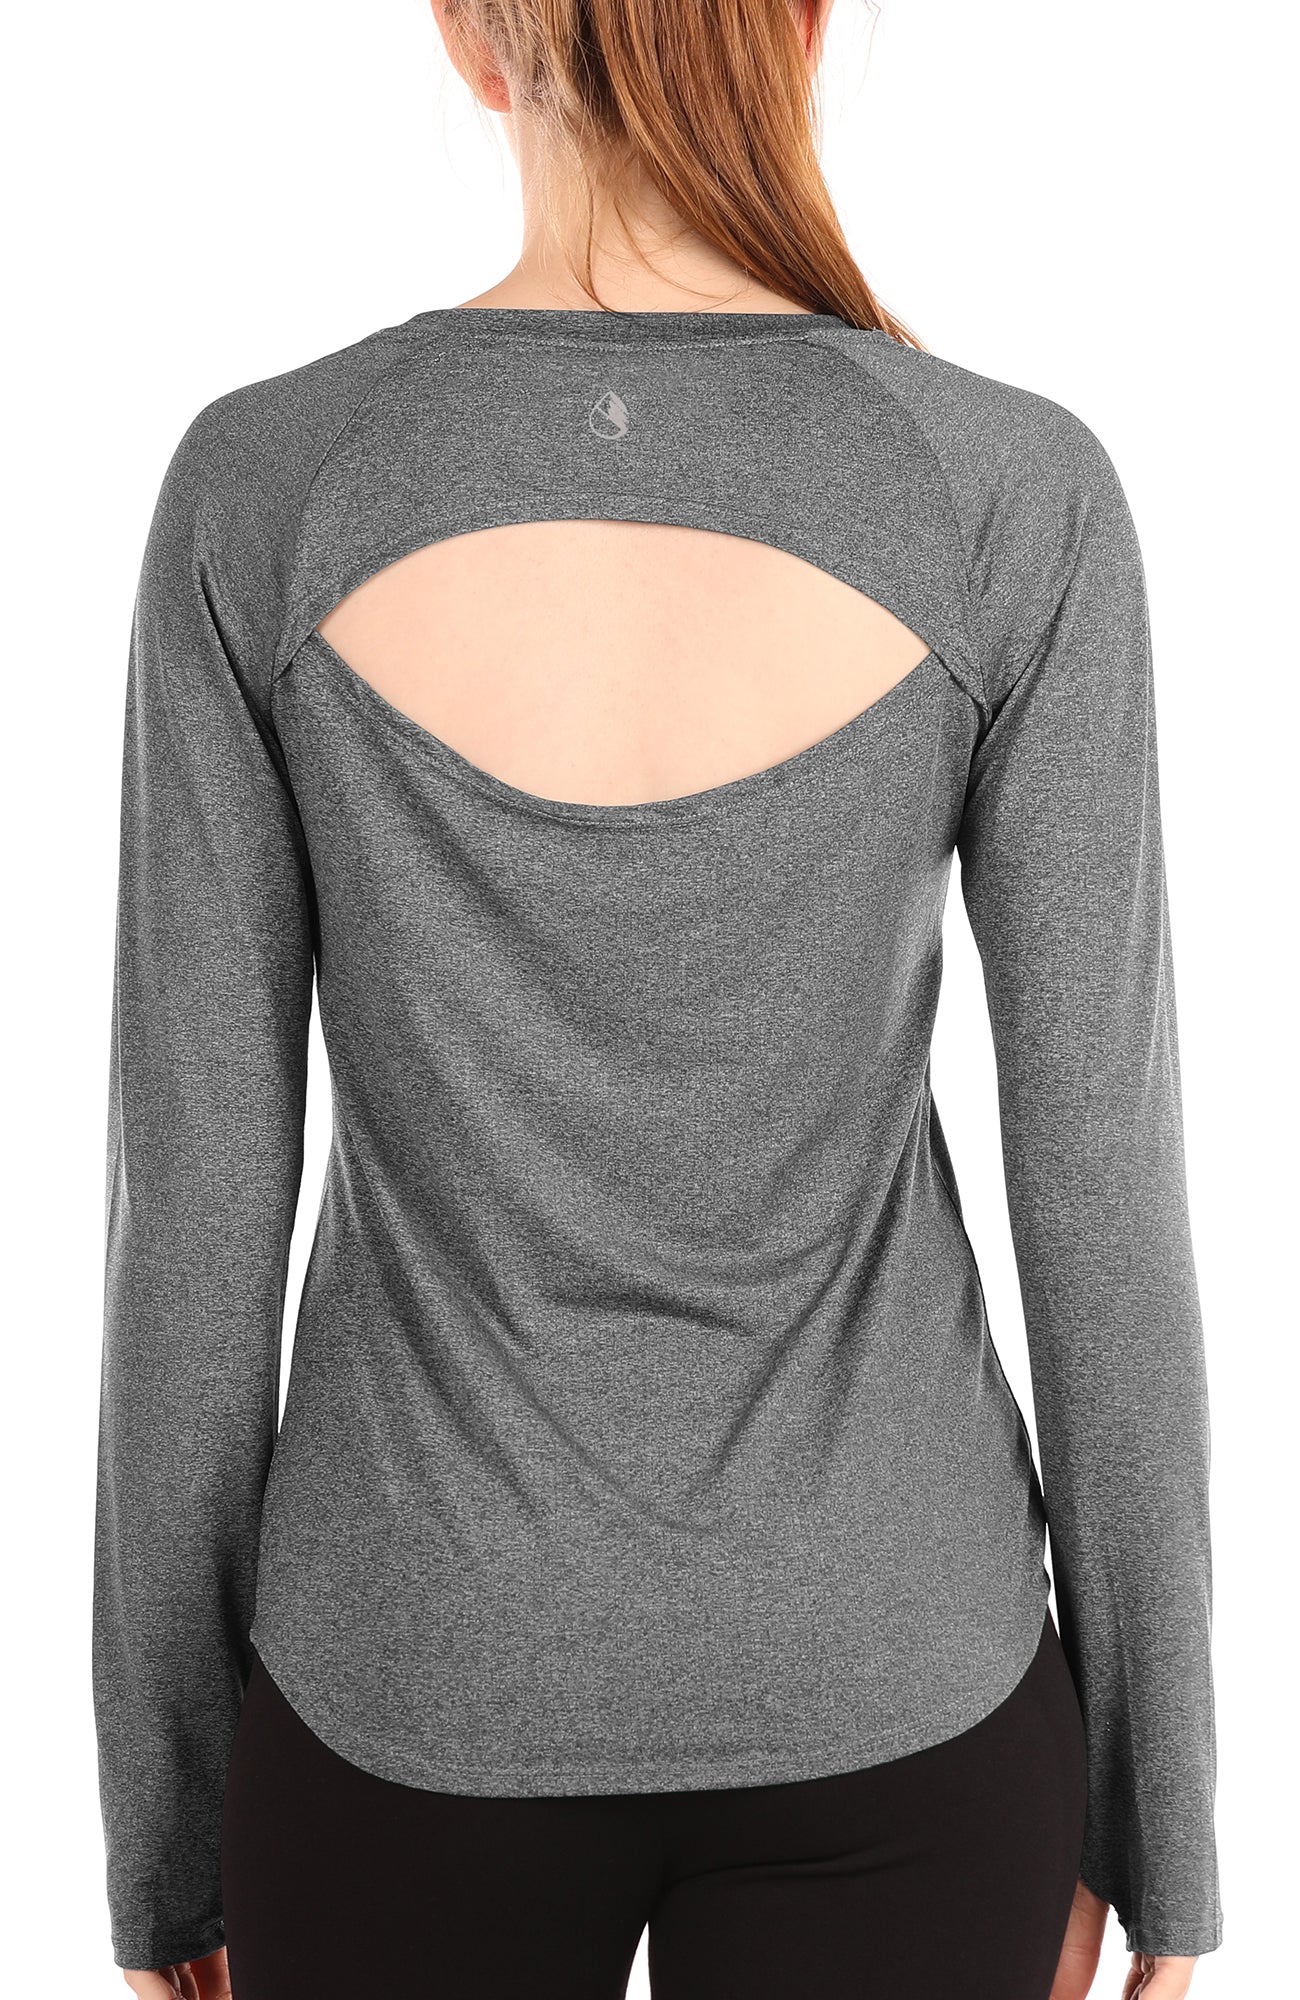 icyzone Long Sleeve Workout Shirts for Women - Open Back Athletic Tops,  Running Yoga Shirts with Thumb Holes